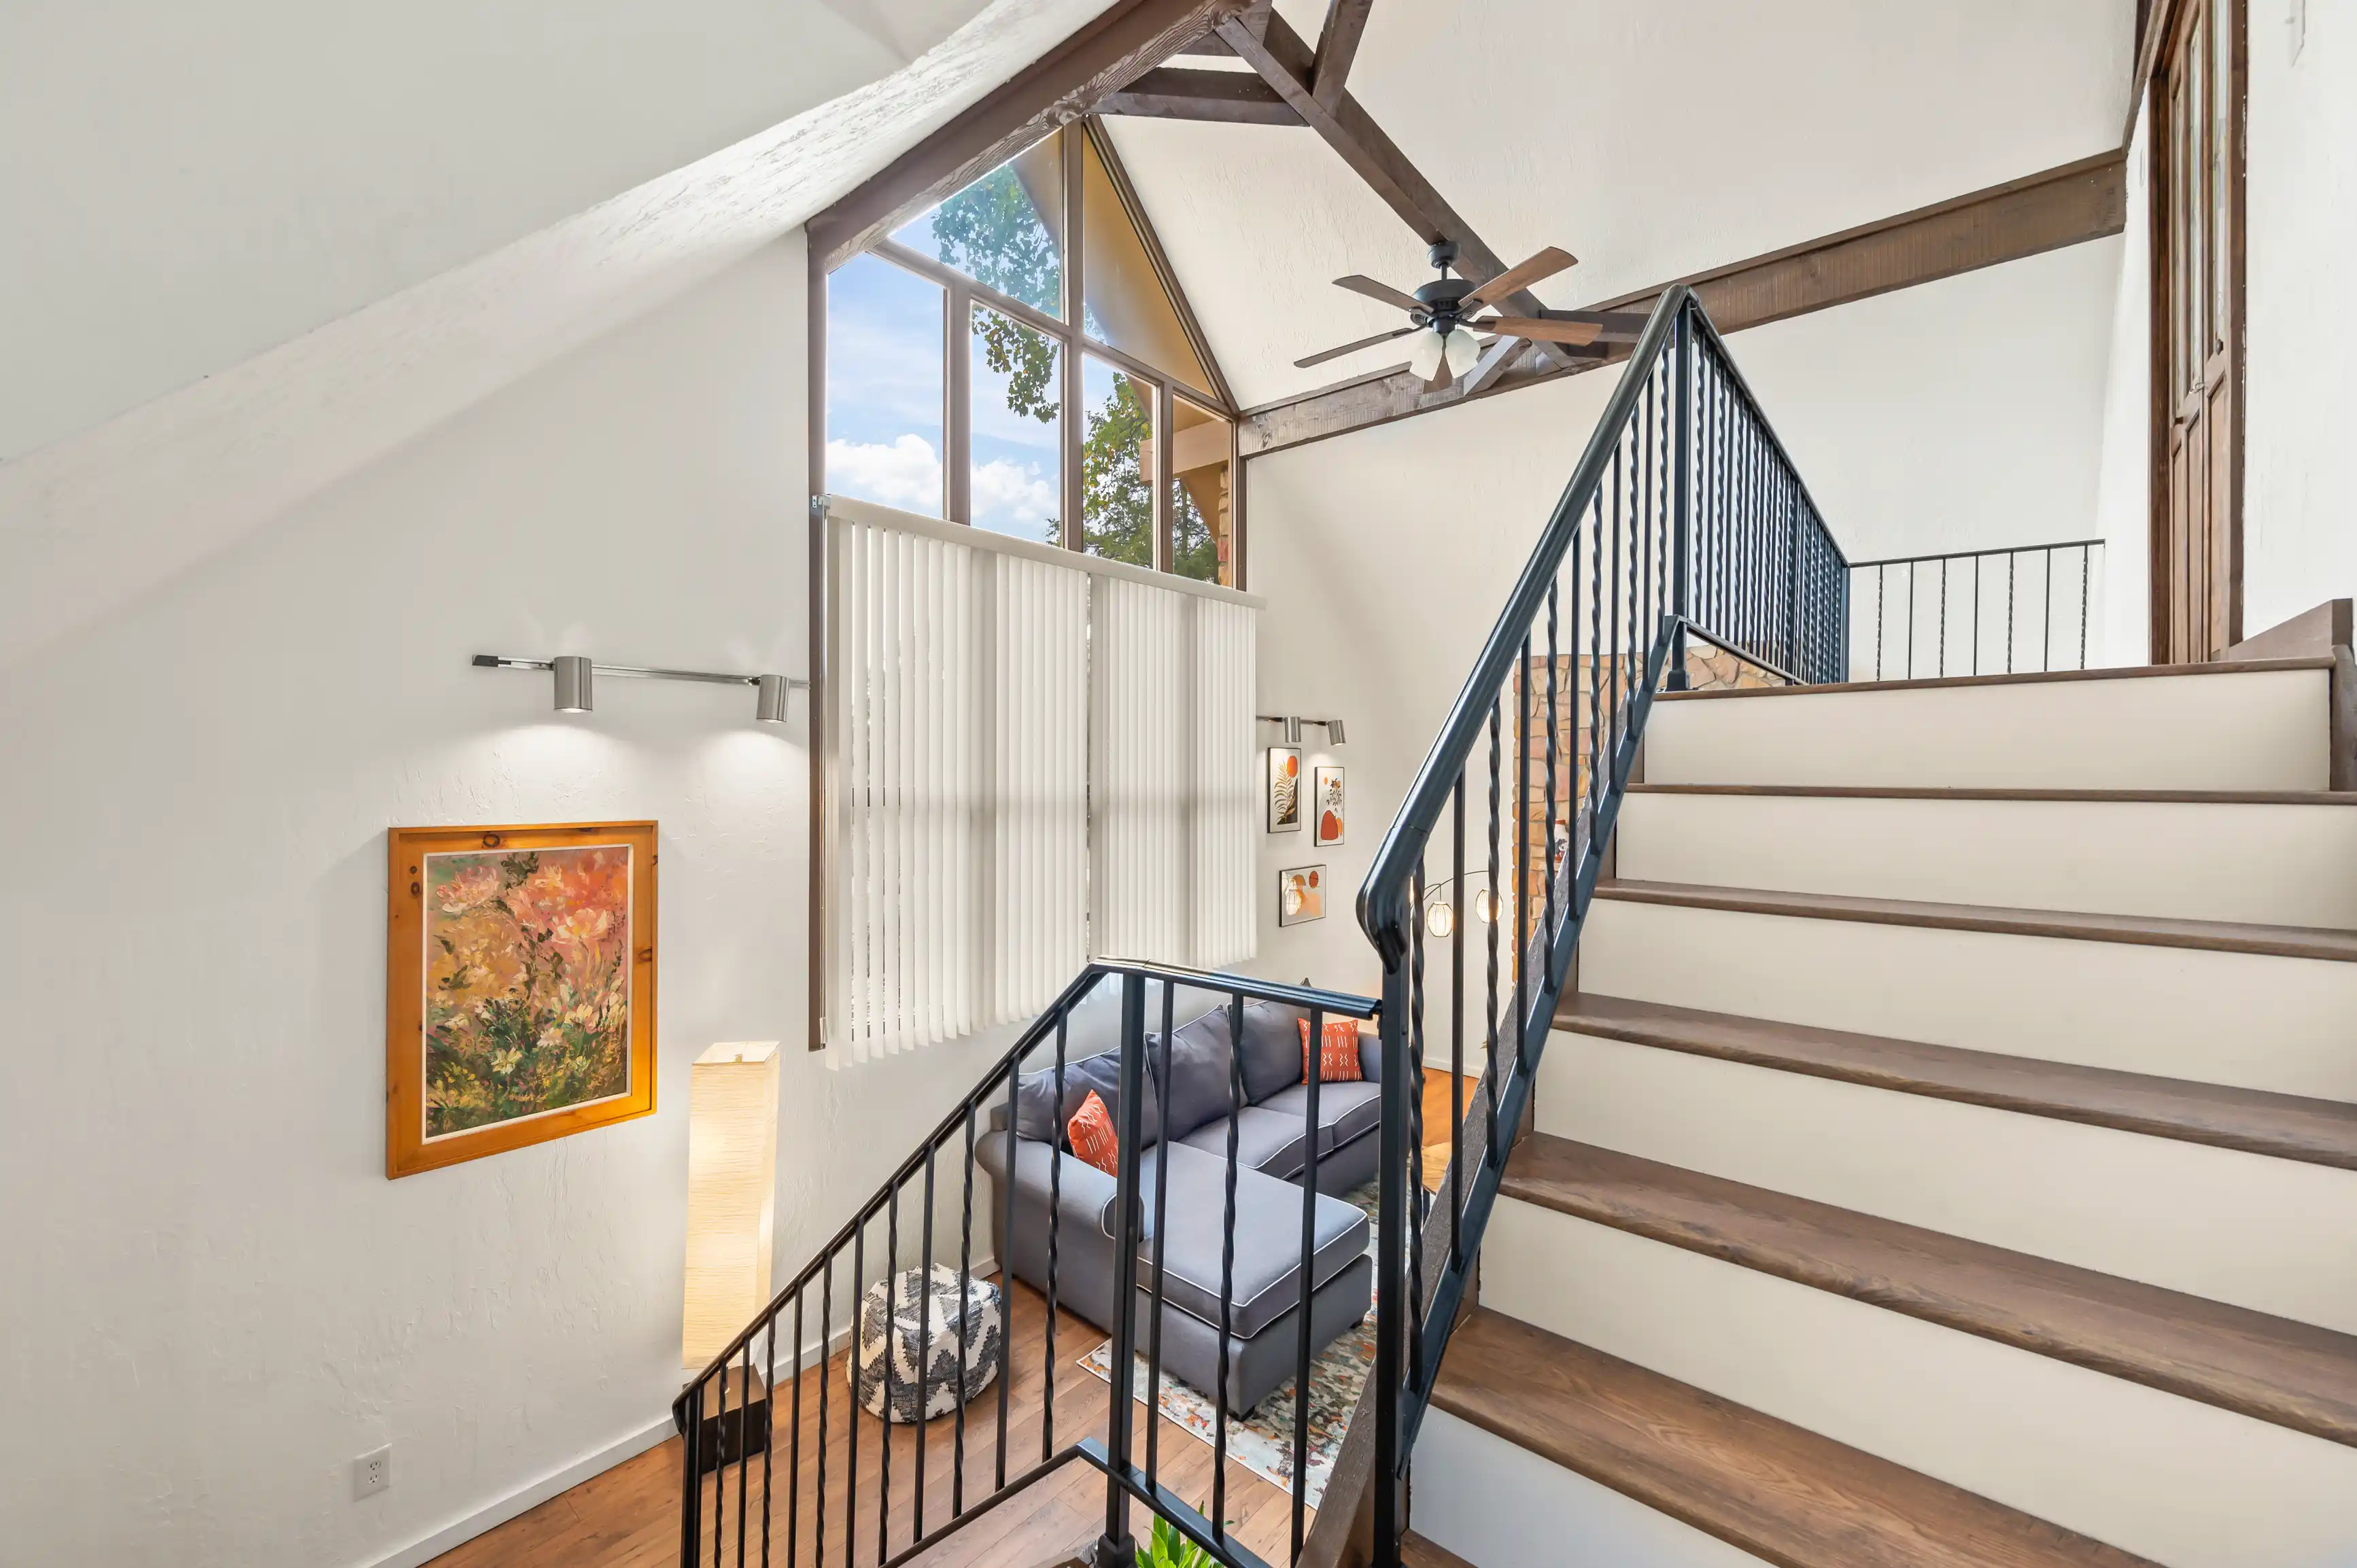 Bright, modern stairwell with large windows, wooden steps, a metal railing, a ceiling fan, and a cozy sitting area with a couch and artwork.